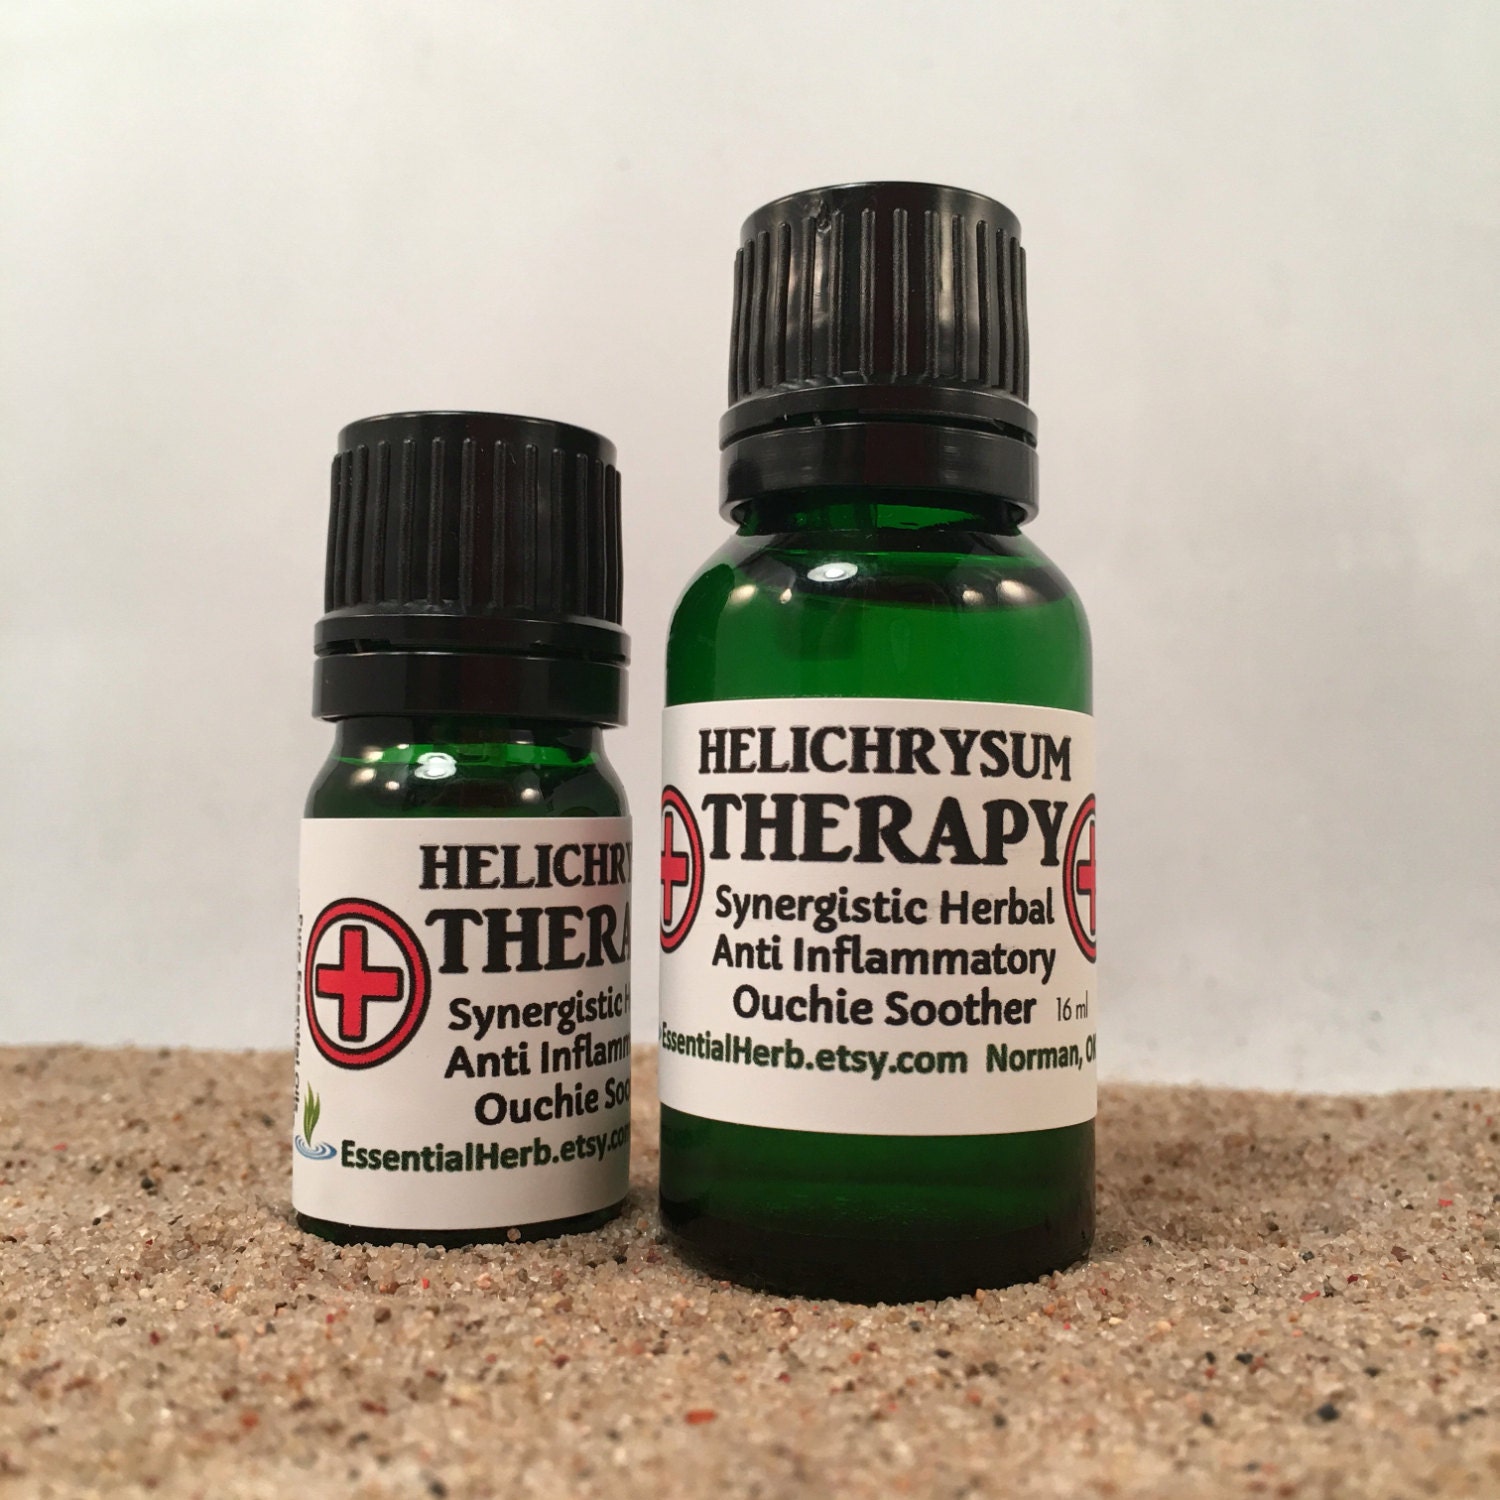 Helichrysum Therapy Essential Oil Blend, Italicum, Therapeutic, Inflammation, Sprains, Bruising, Soothing